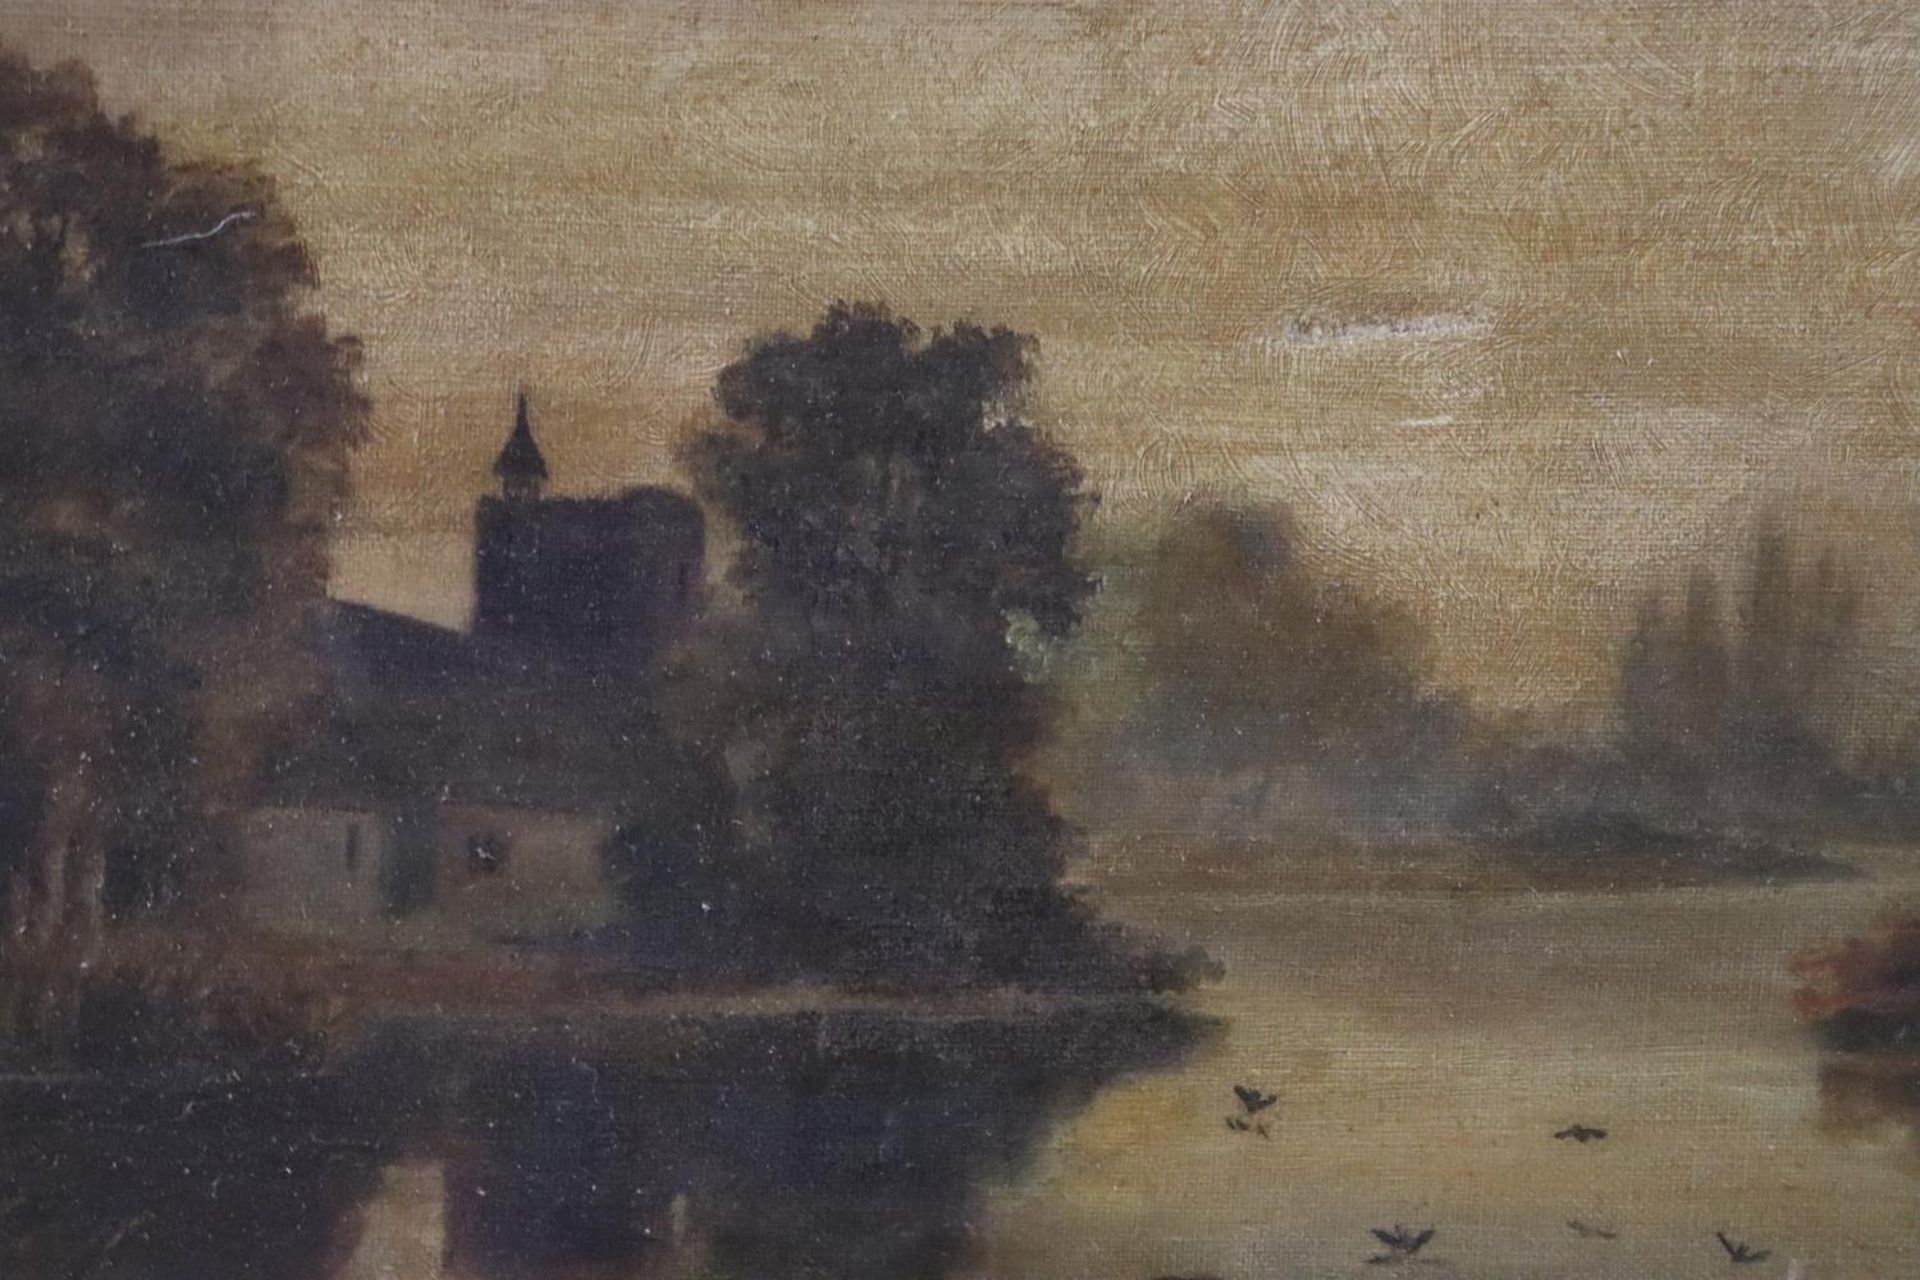 AN OIL ON CANVAS OF A COUNTRY SCENE WITH BIRDS ON A LAKE - Image 2 of 2